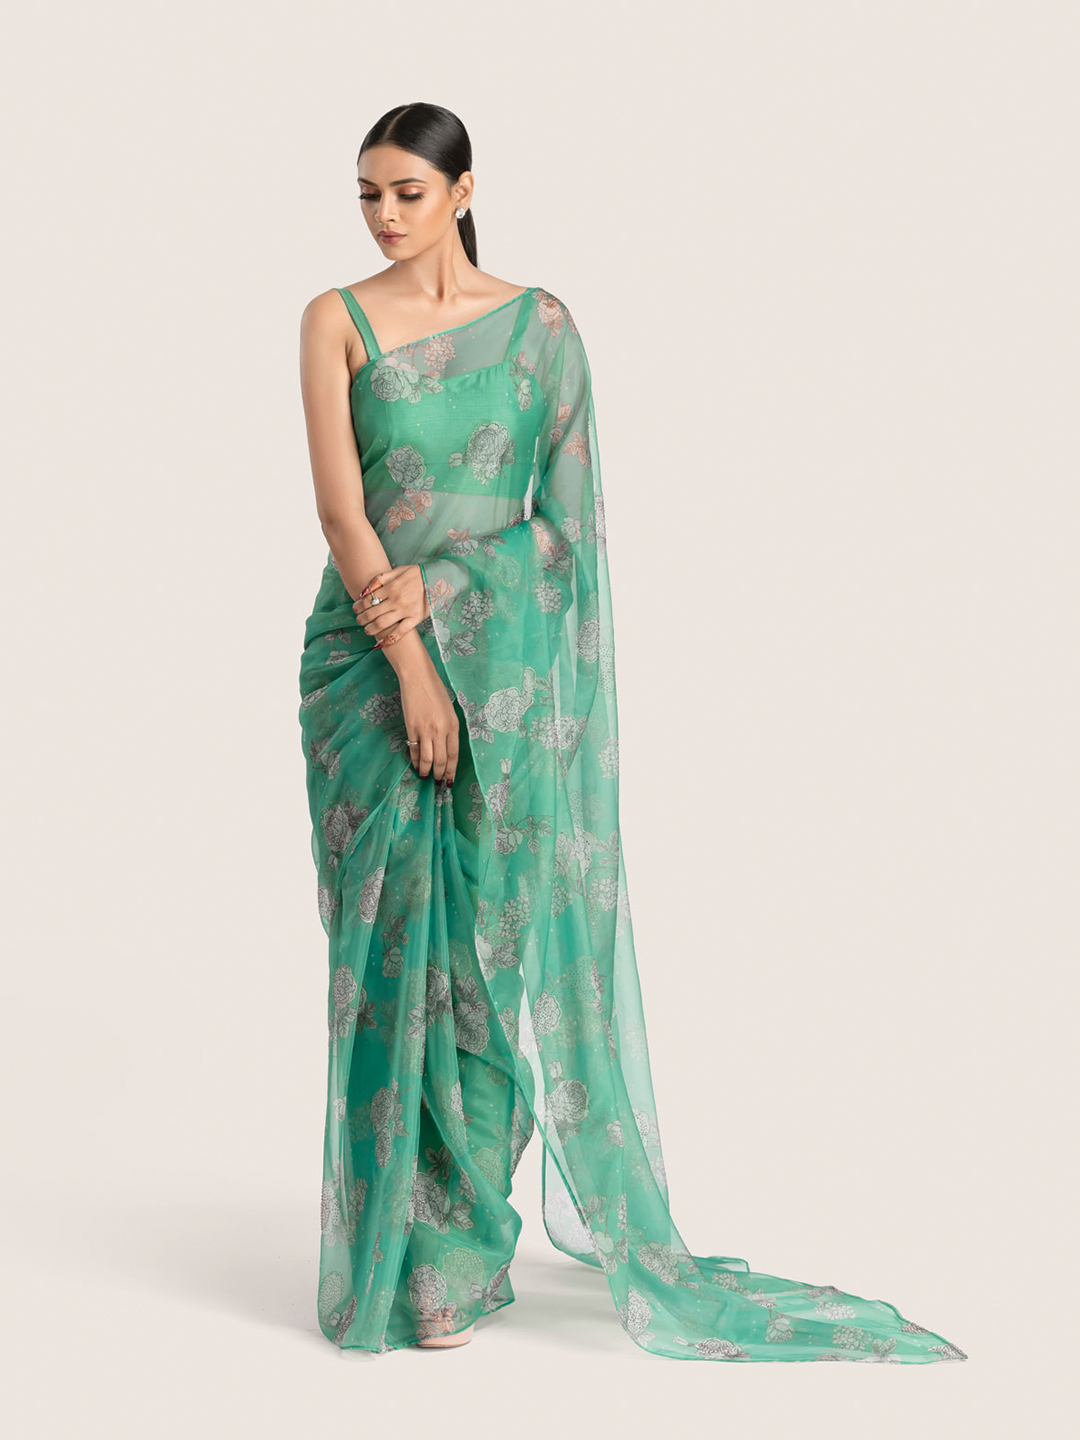 Floral Printed Green Organza Saree With Blouse Fabric